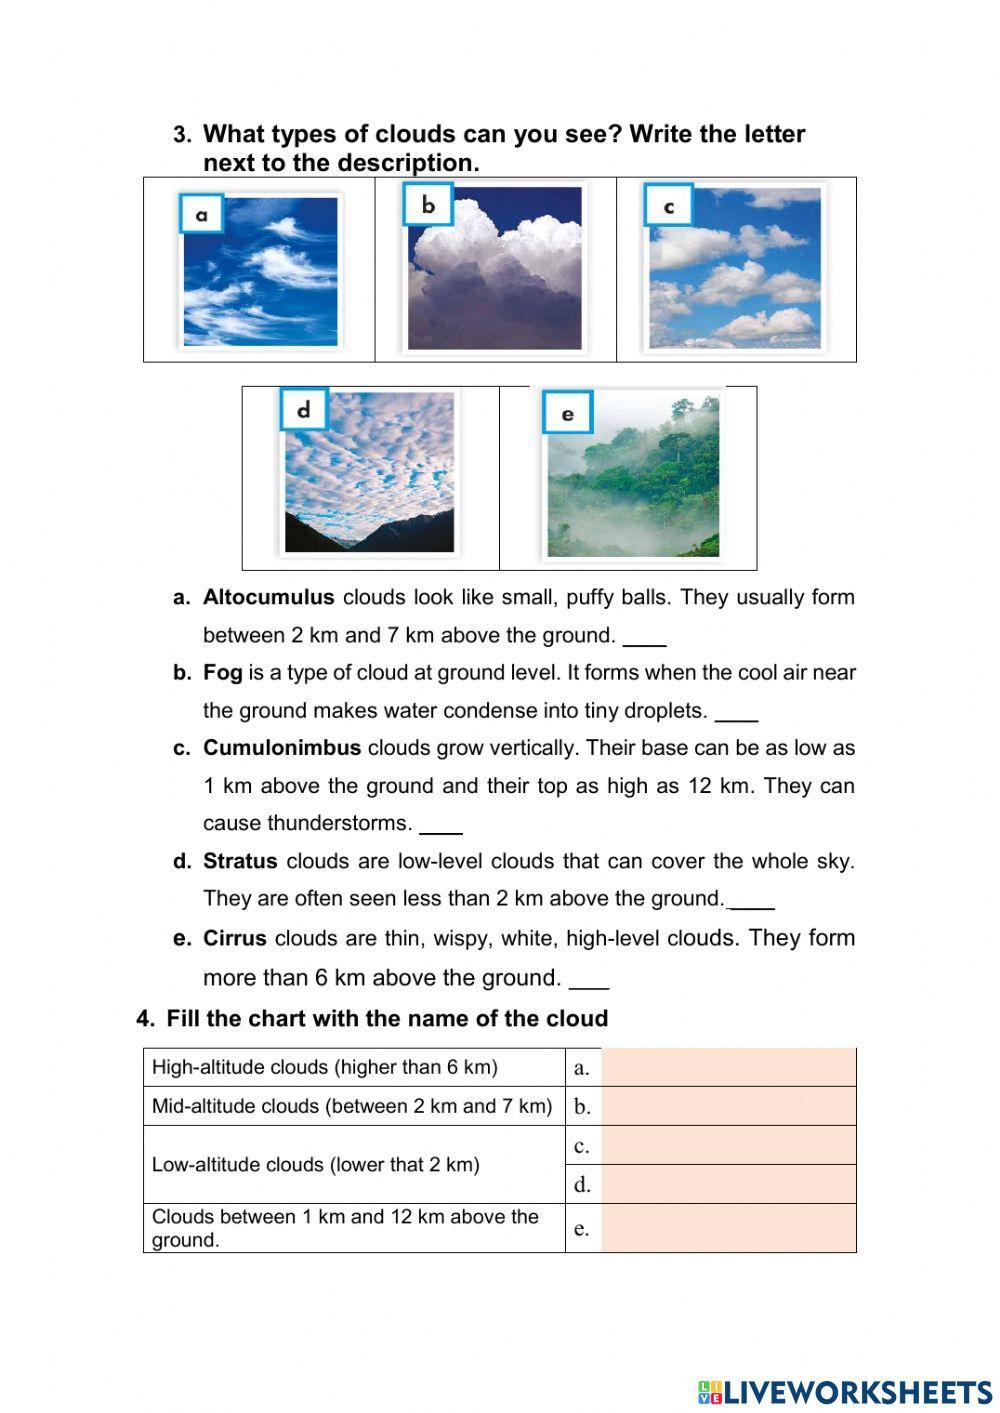 Precipitation and types of clouds